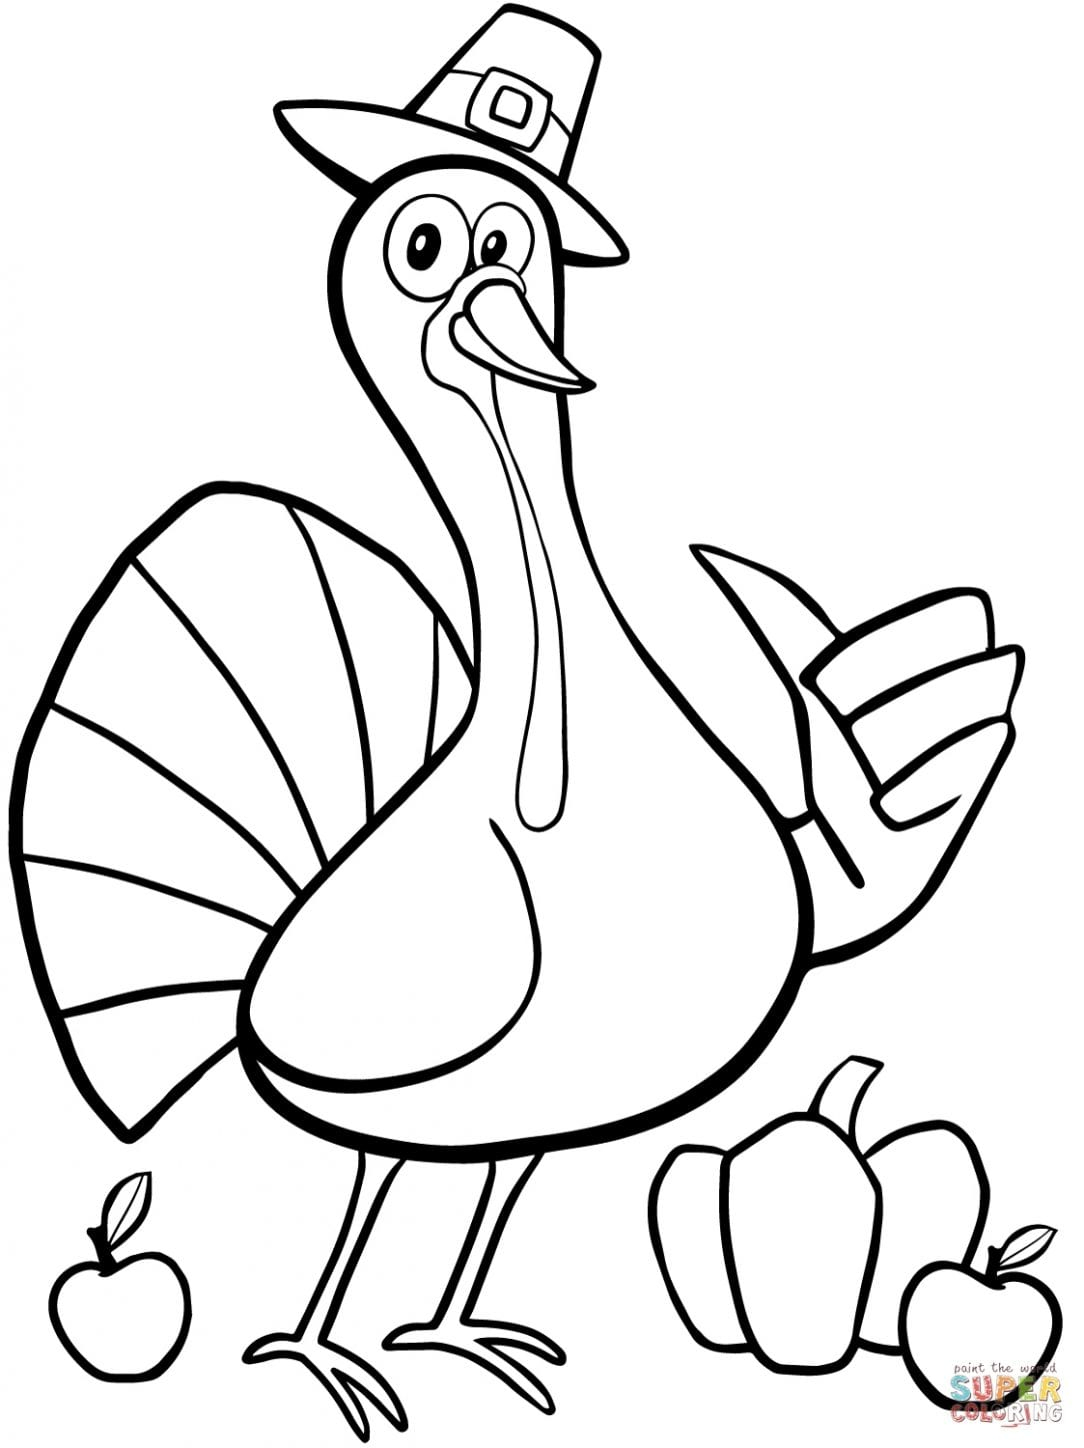 Preschool Turkey Coloring Pages 29 Archaicawful Turkey Coloring Pages Printable Day For Preschoolers